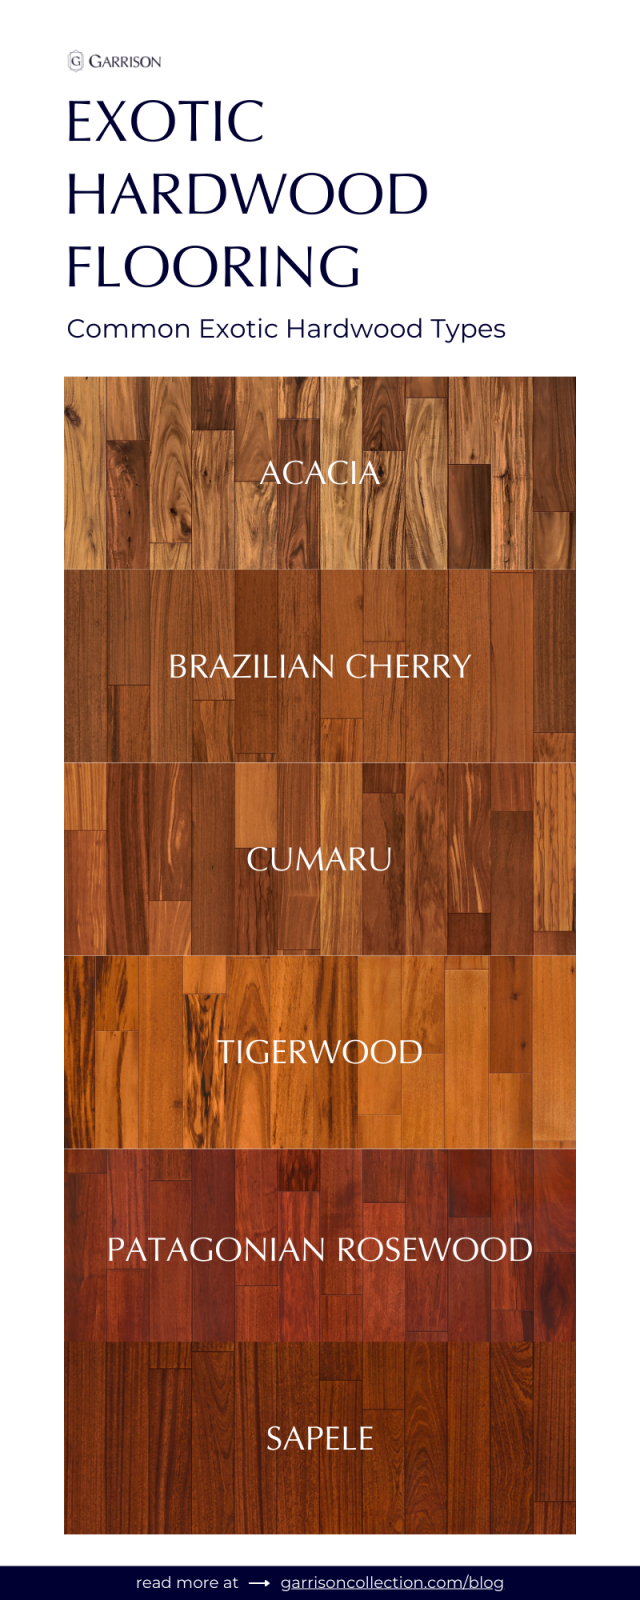 Blog Graphic for Types of Exotic Hardwood Flooring with Images of Acacia, Brazilian Cherry, Cumuru, Tigerwood, Patagonian Rosewood, and Sapele - Garrison Collection